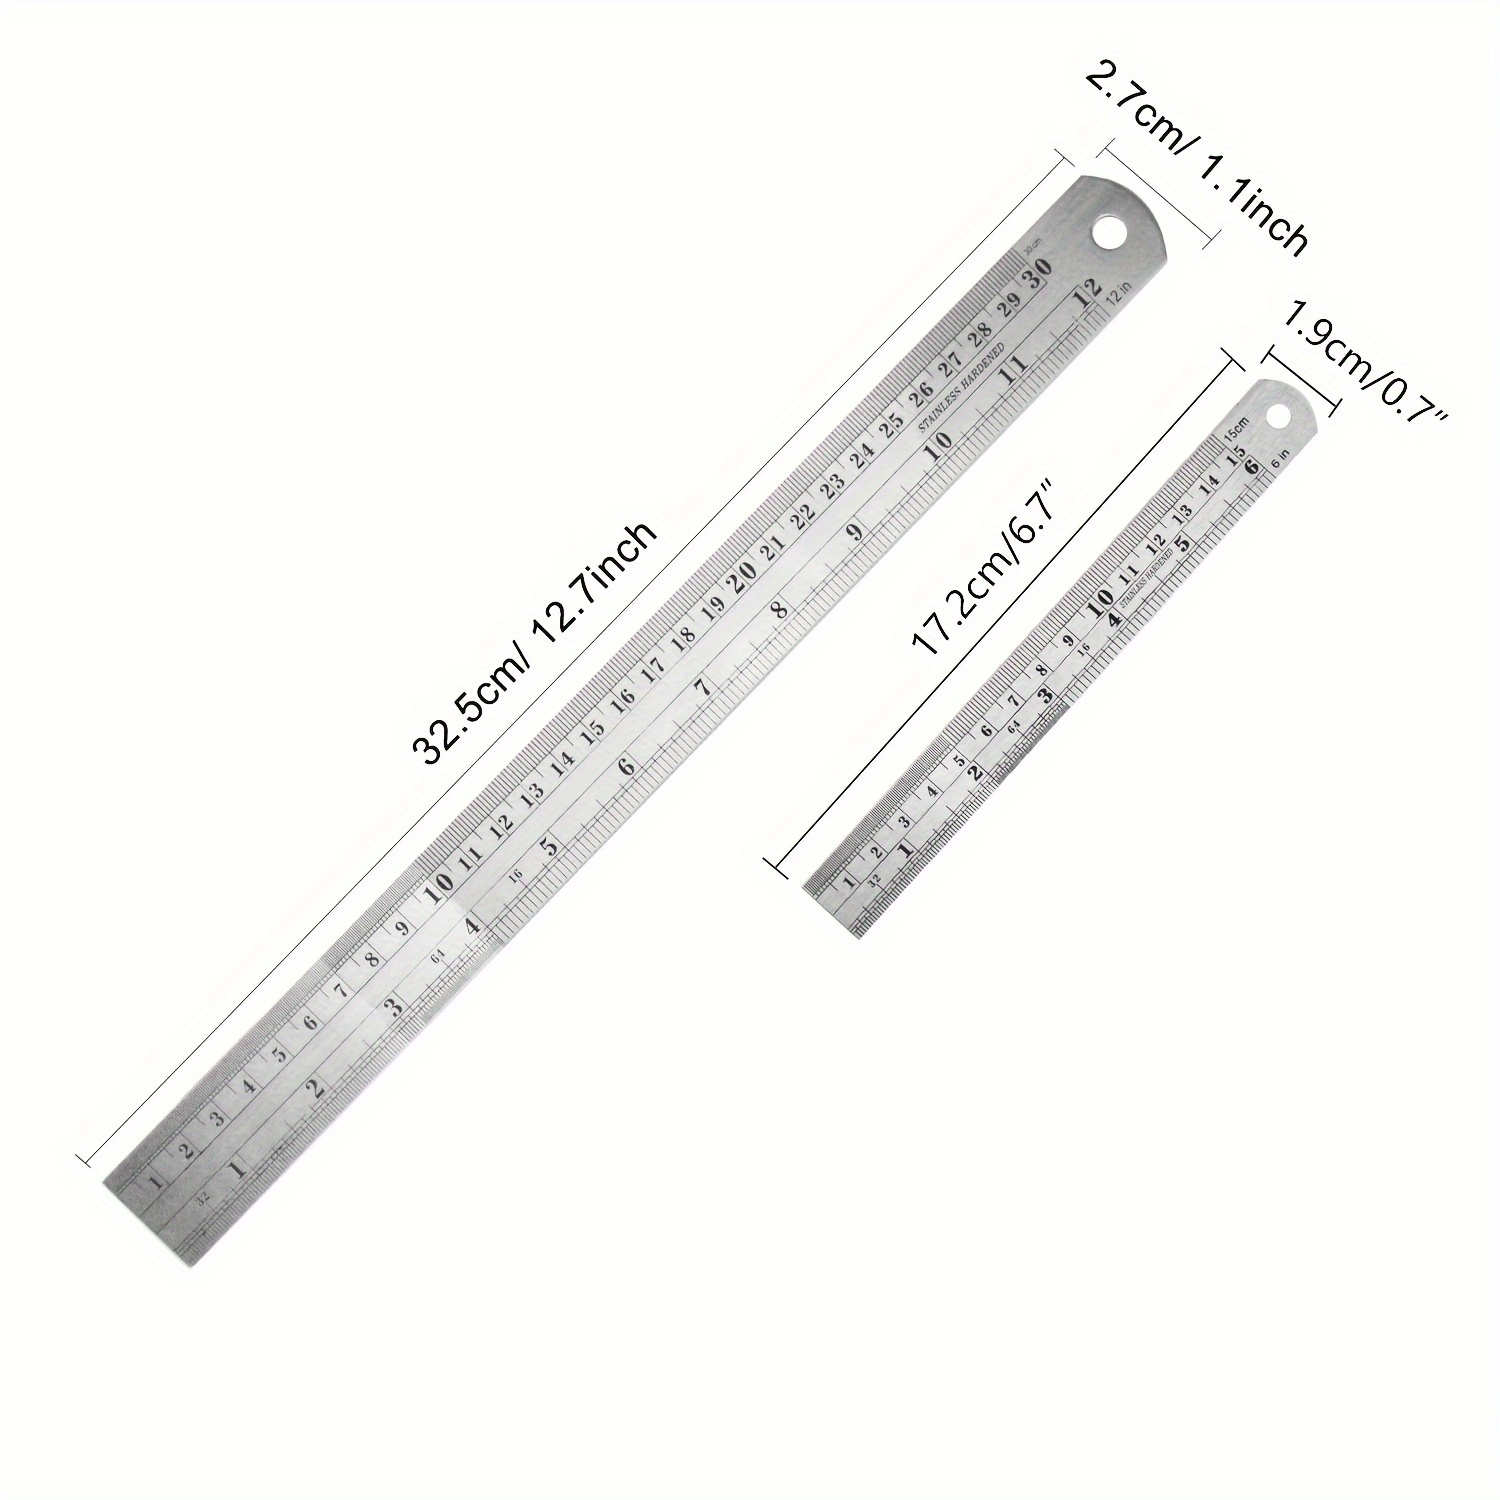 6 Inch Stainless Steel Ruler Flexible Aluminum Ruler for Excellent  Precision and Accuracy 2 Pack.